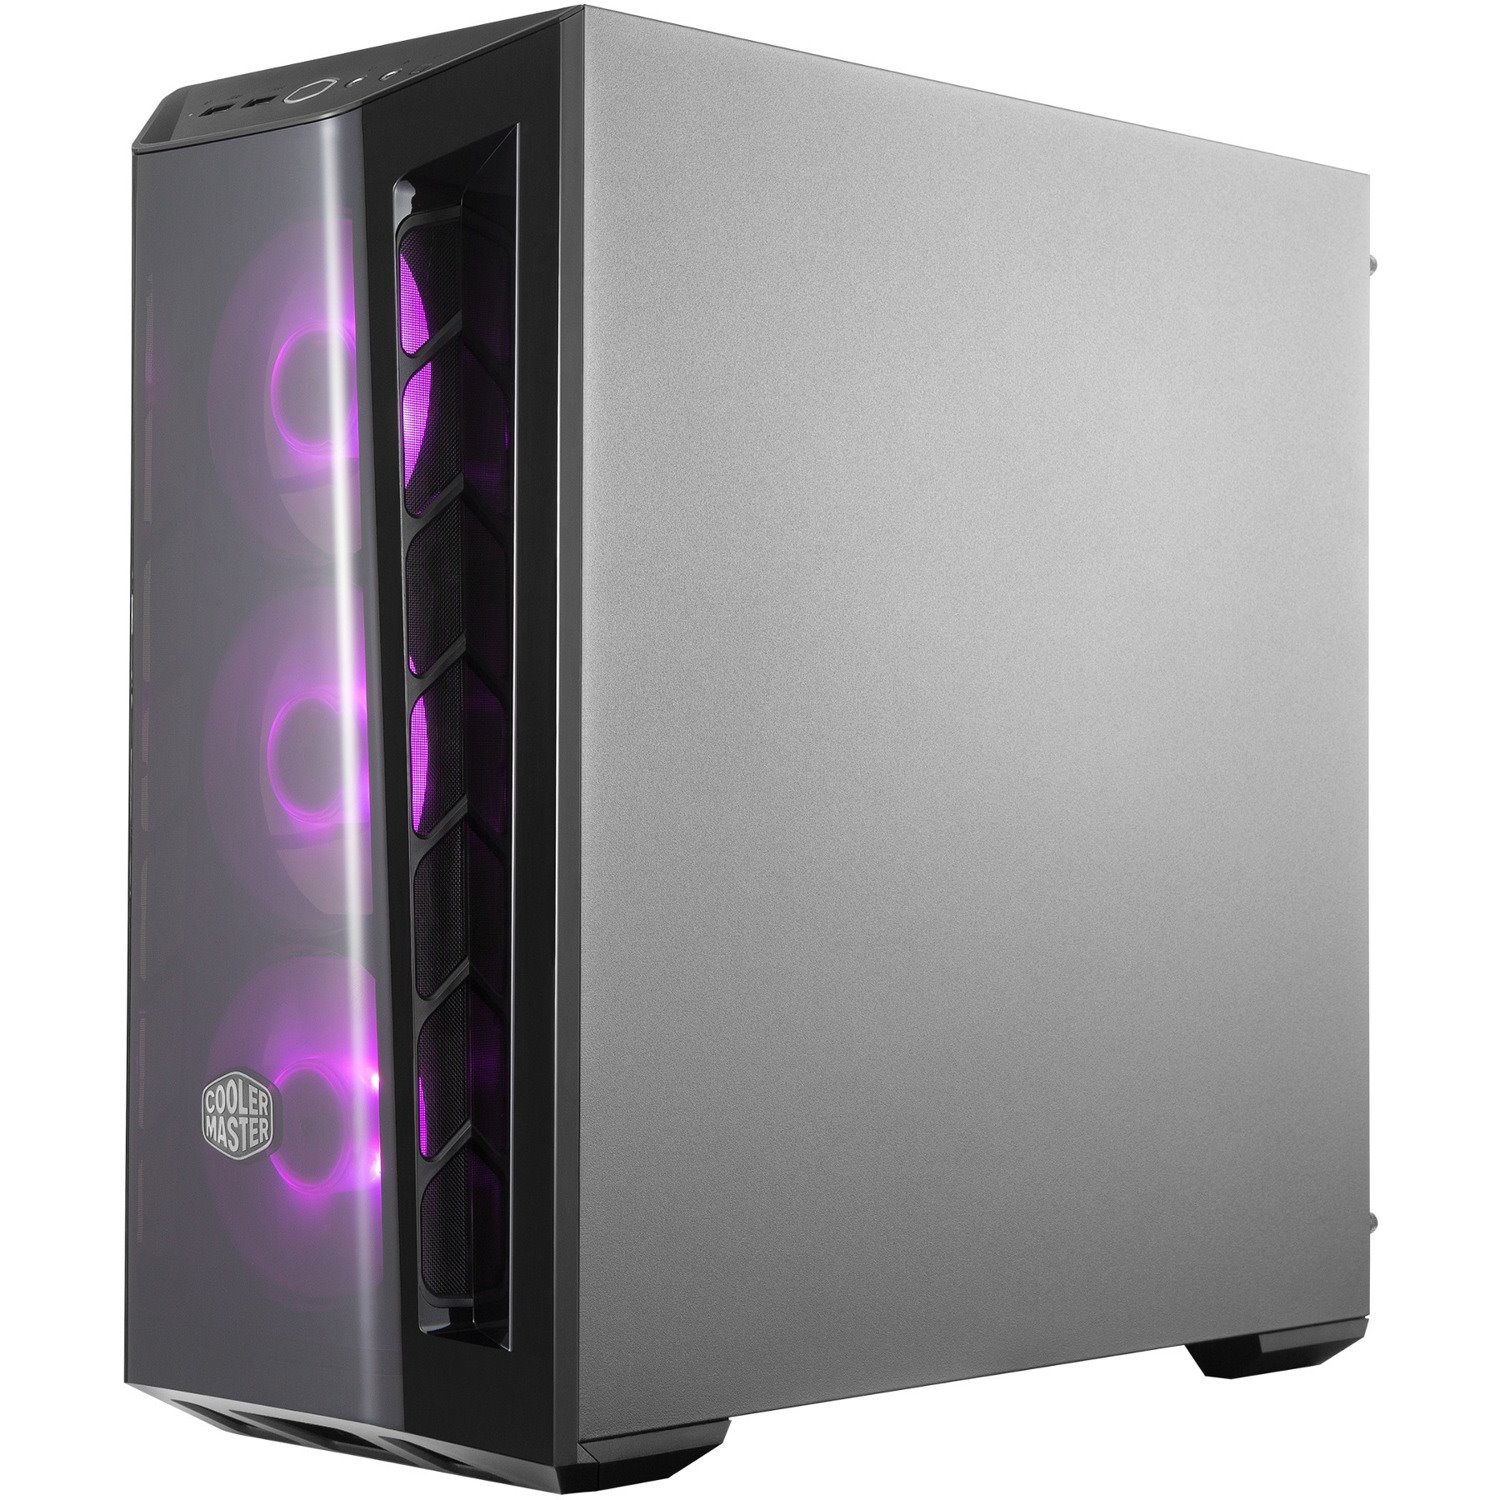 Cooler Master MasterBox MB520 RGB Computer Case - ATX, Micro ATX, Mini ITX Motherboard Supported - Mid-tower - Steel, Plastic, Tempered Glass - Black